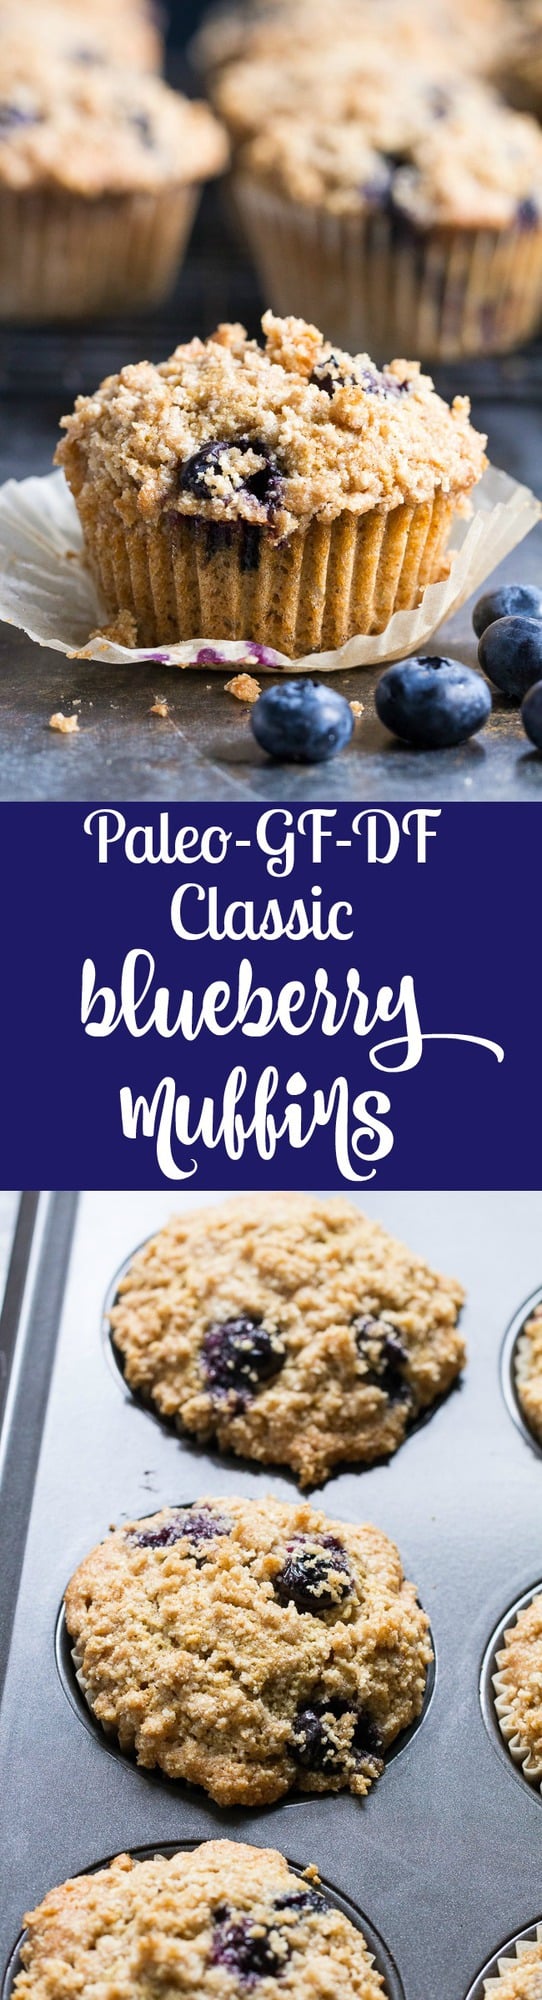 These Paleo Blueberry Muffins have classic flavor and texture plus the perfect crumb top - it's downright addicting!   Have one freshly baked or make them ahead of time and enjoy as a part of your breakfast or a grab-n-go snack.  They're grain free, dairy free, gluten-free and refined sugar free.